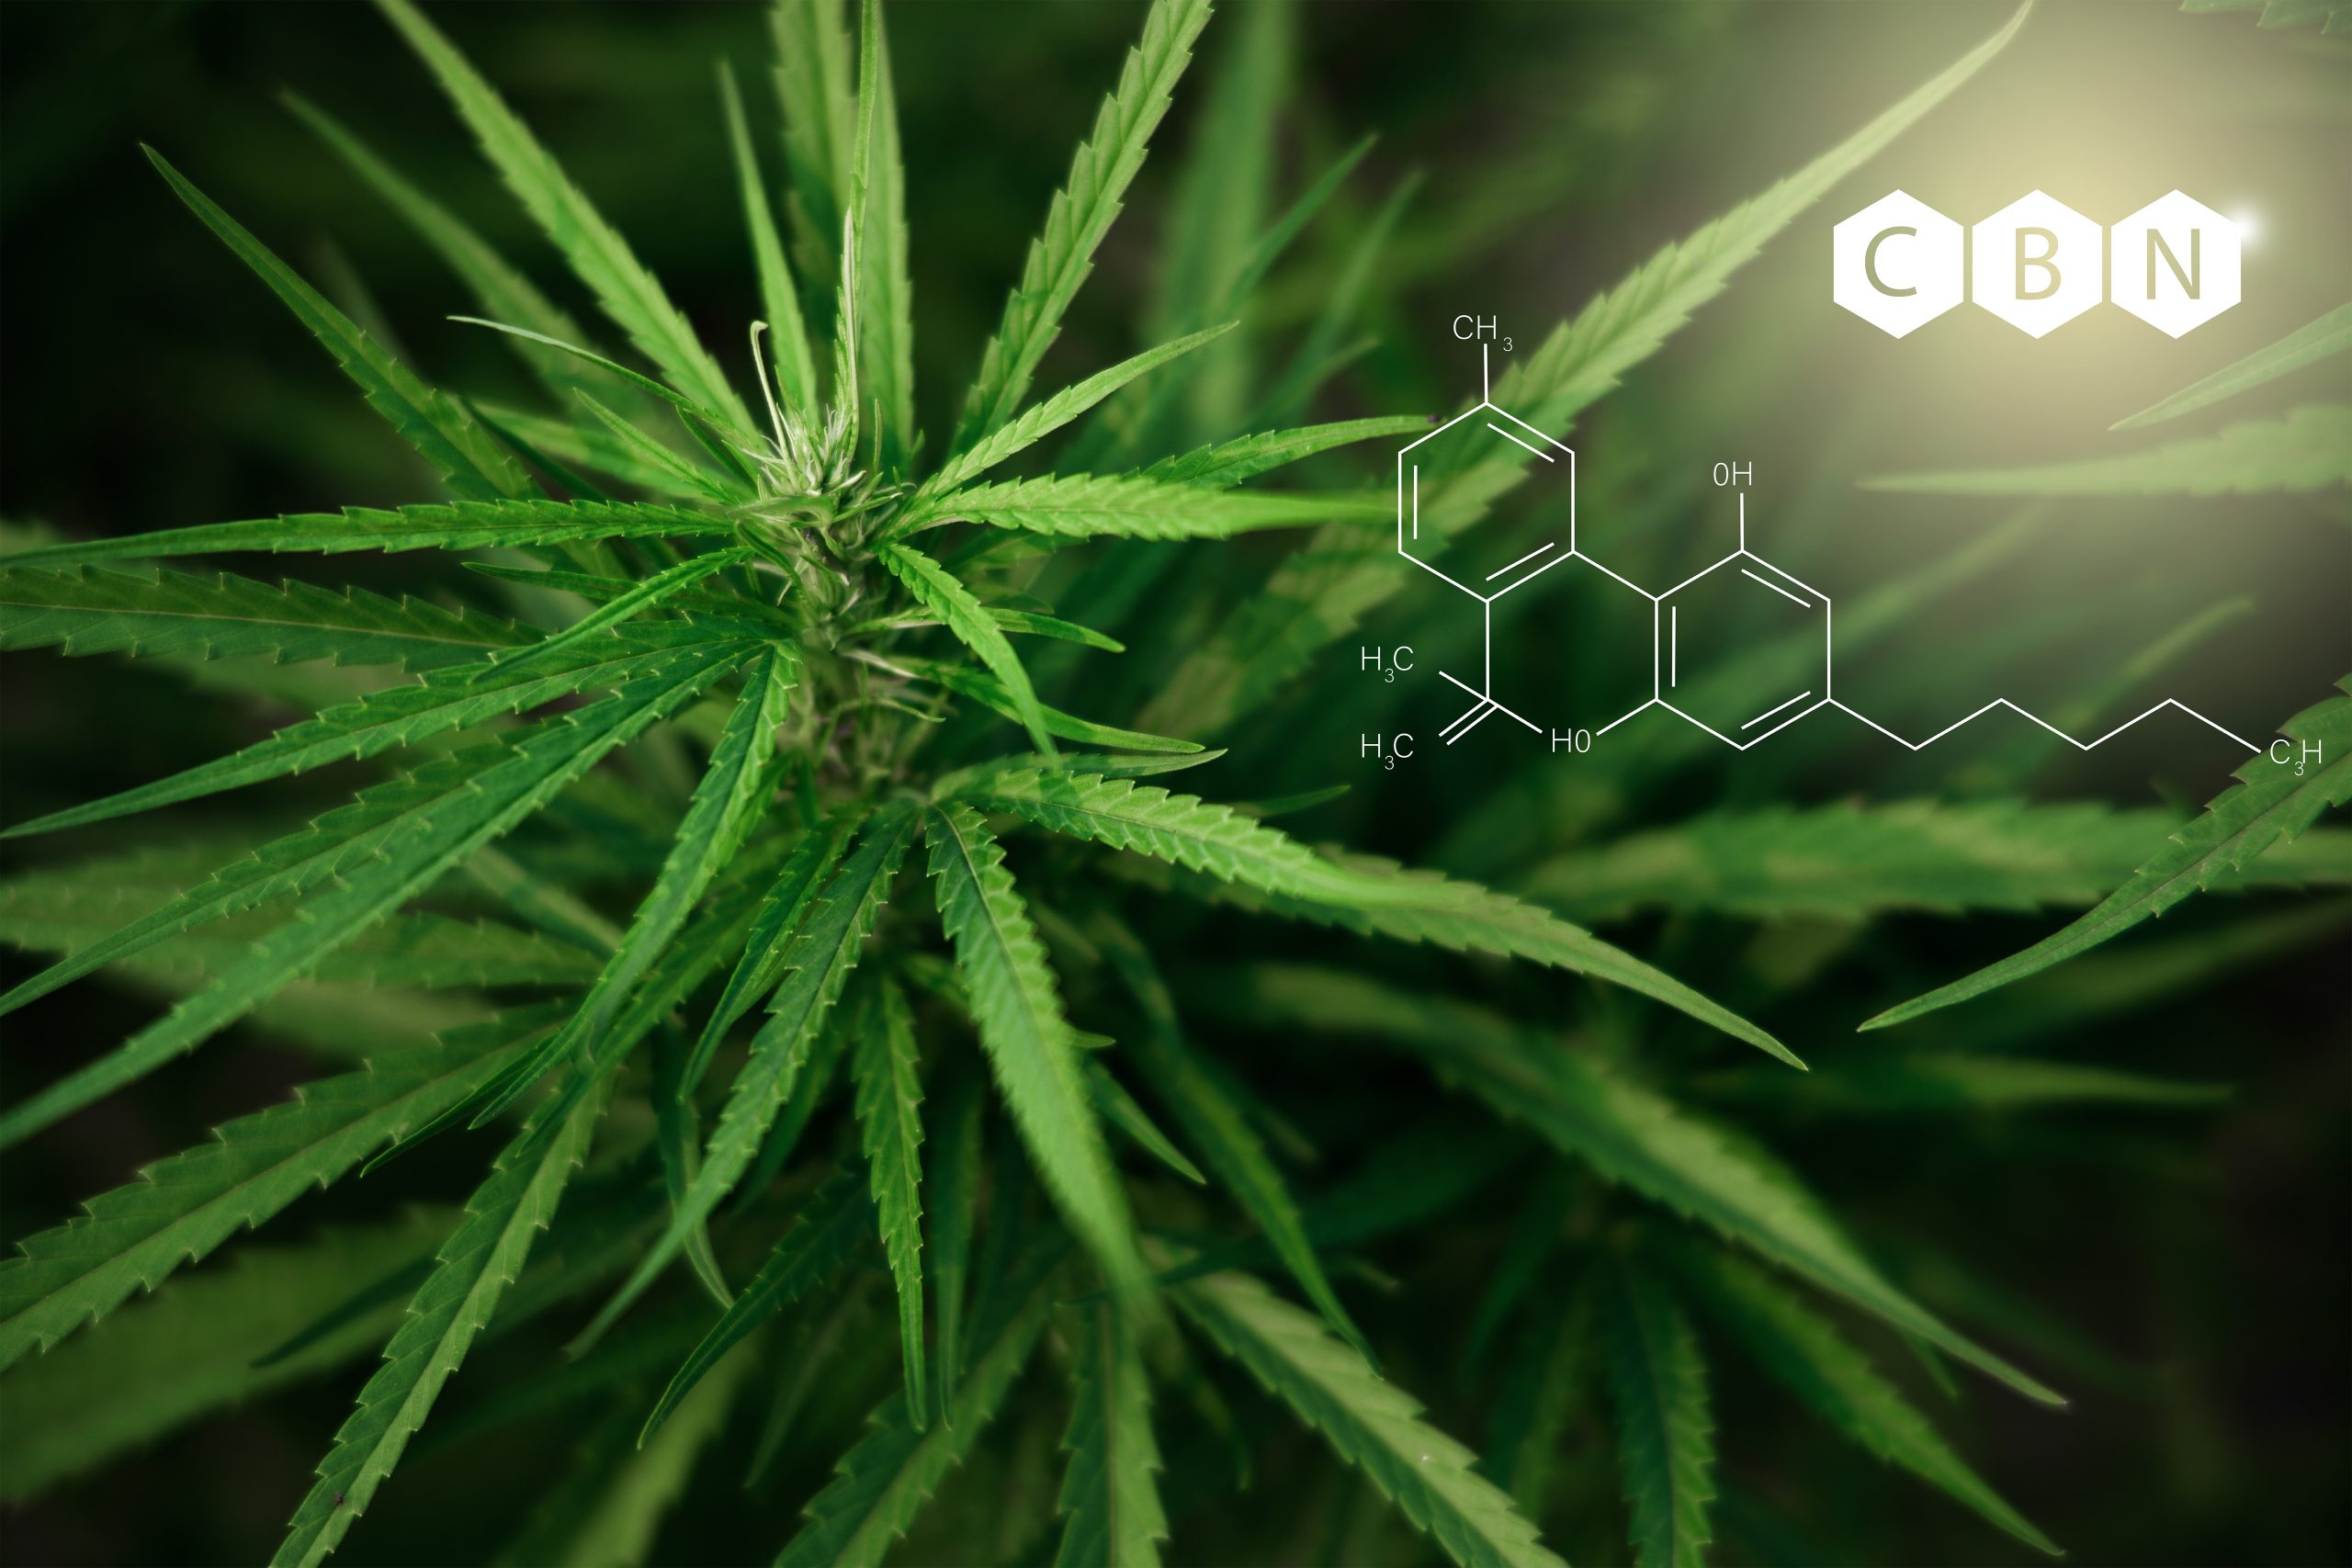 CBN vs CBD – What are The Differences?